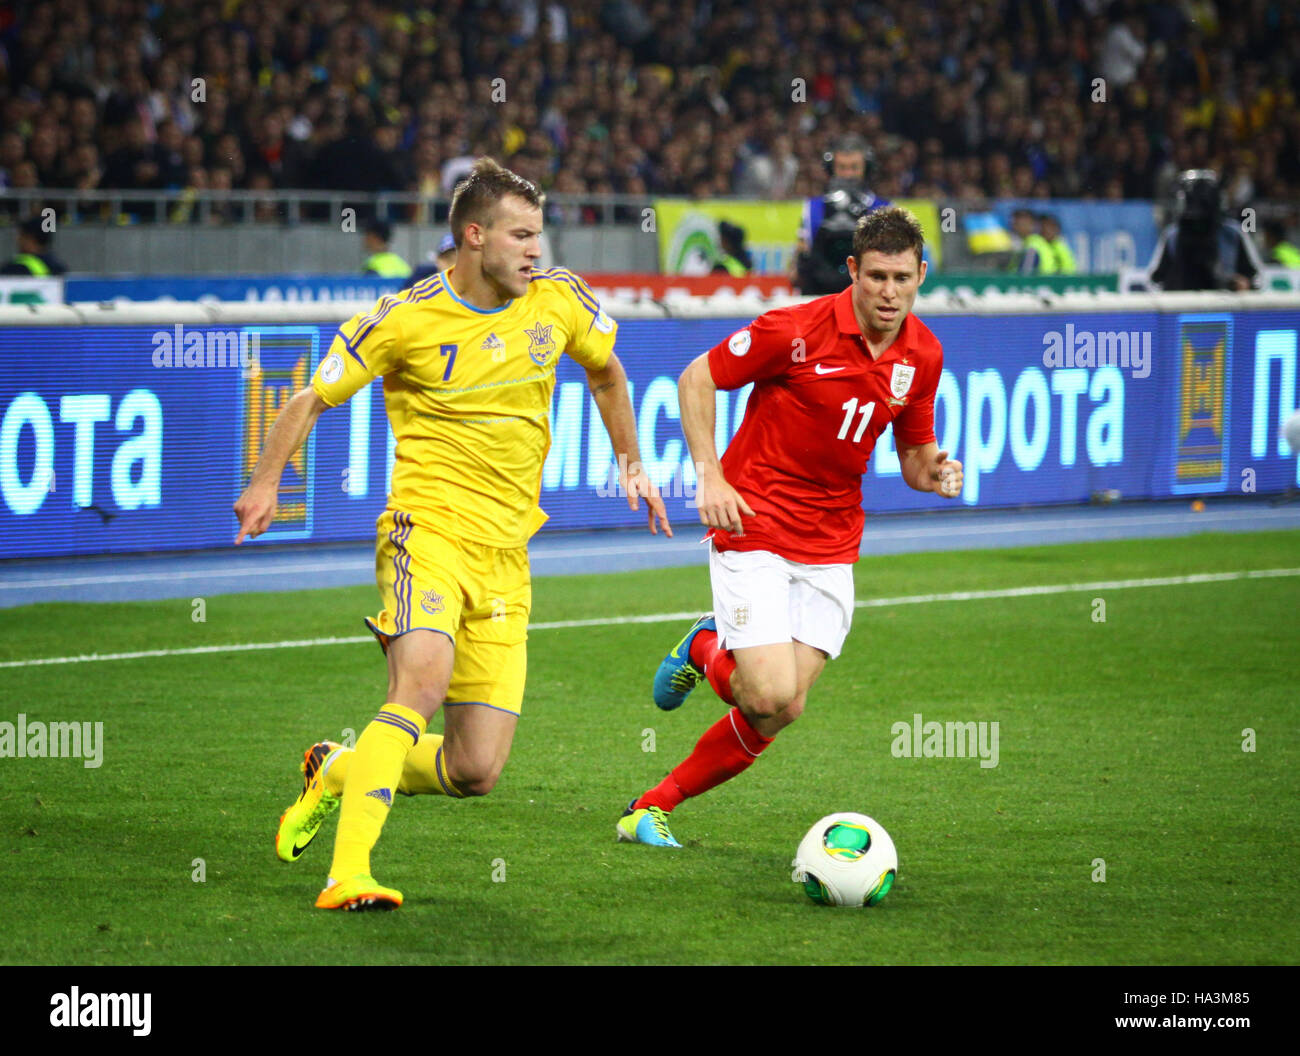 KYIV, UKRAINE - SEPTEMBER 10, 2013: Andriy Yarmolenko of Ukraine (L) fights for a ball with James Milner of England during their FIFA World Cup 2014 q Stock Photo